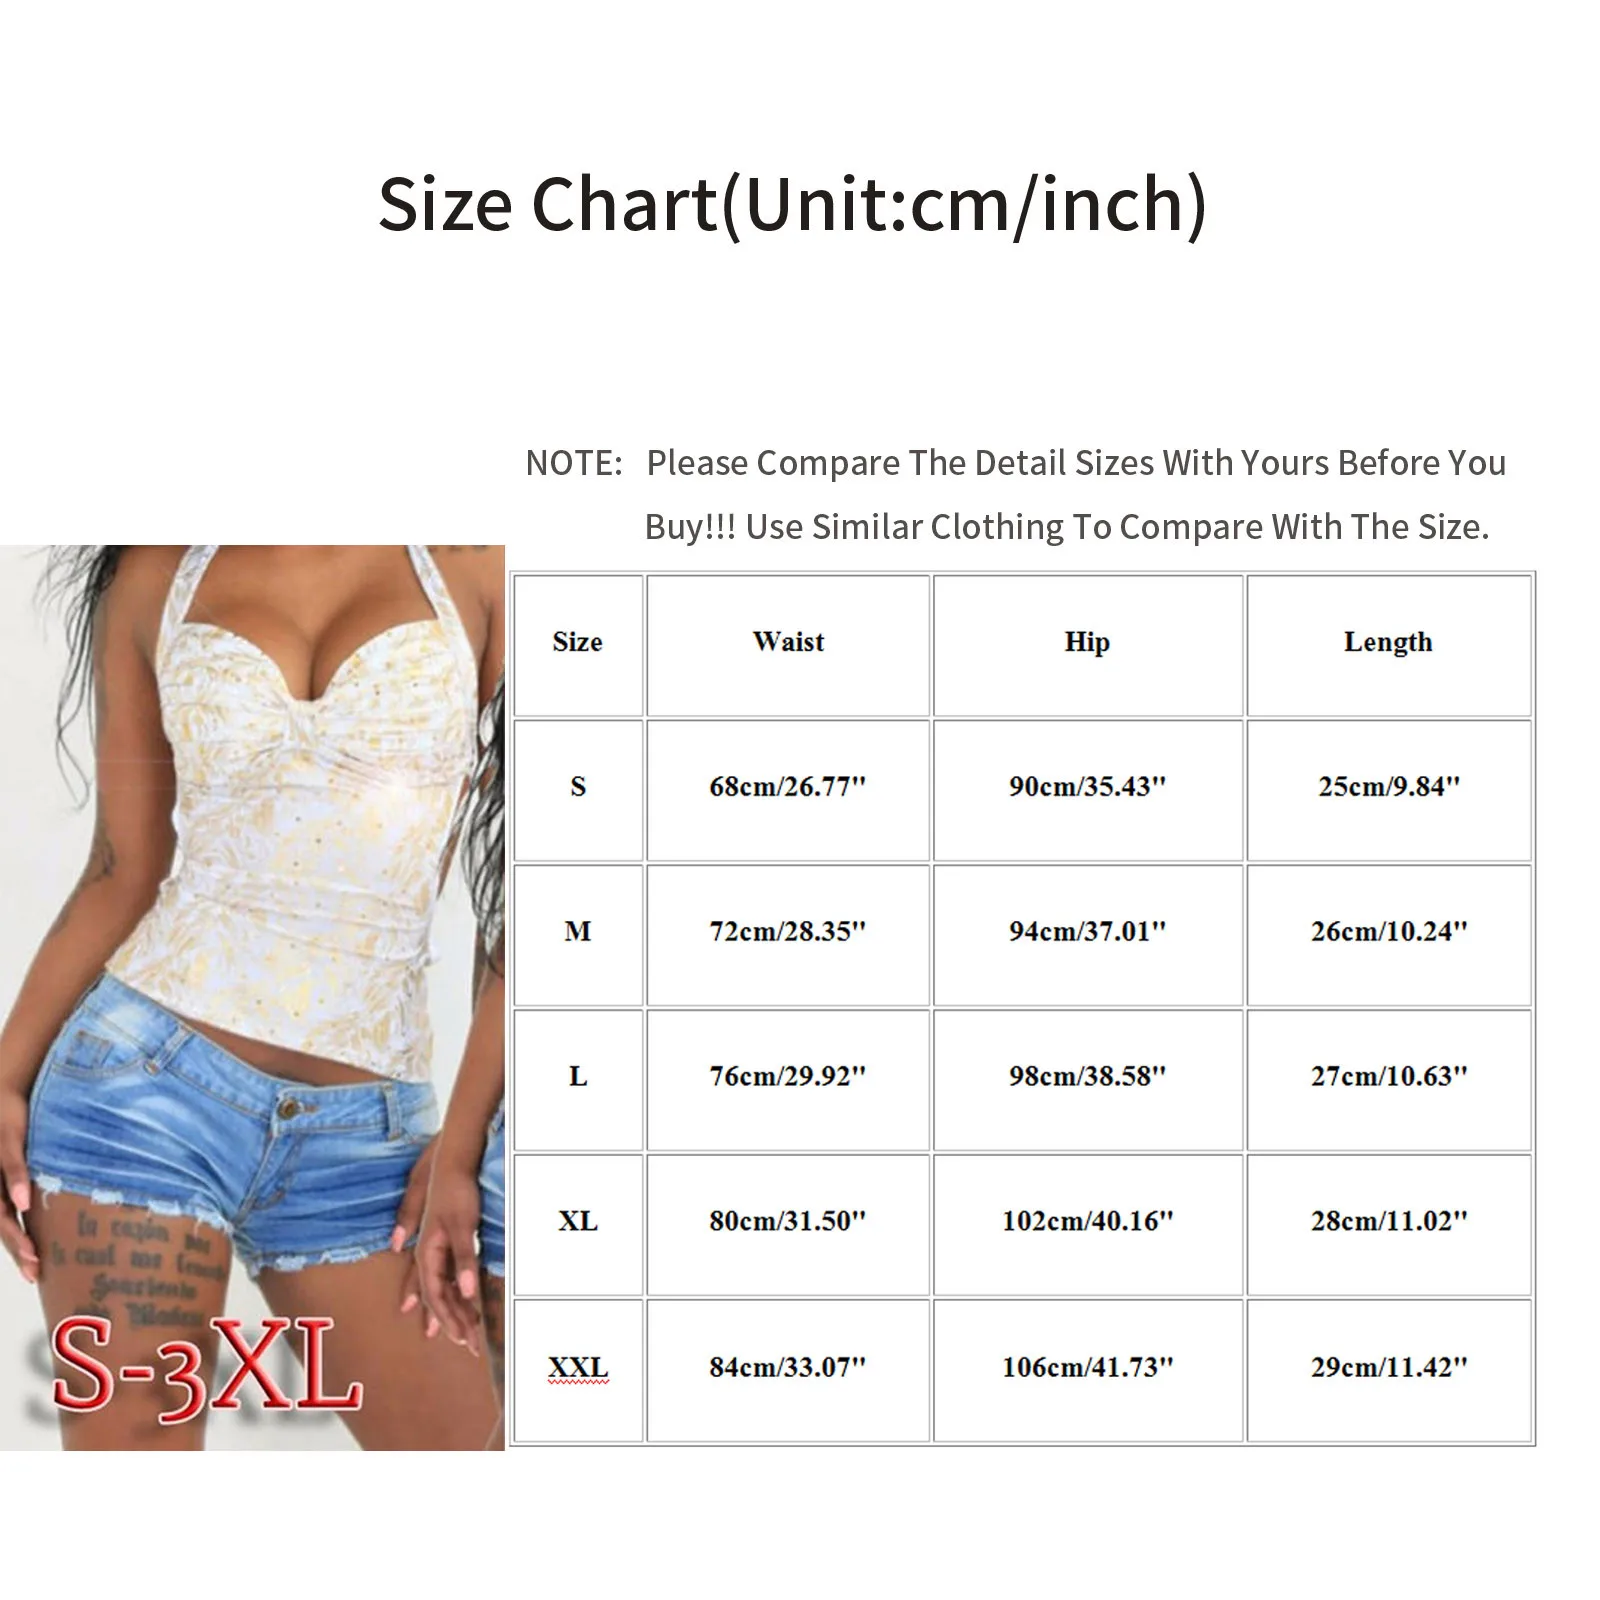 

Hot Sale Woman Summer Denim Shorts Fashion Casual High Waist Curled Frayed Ripped Jeans Shorts Fashion Ripped Shorts #T1G